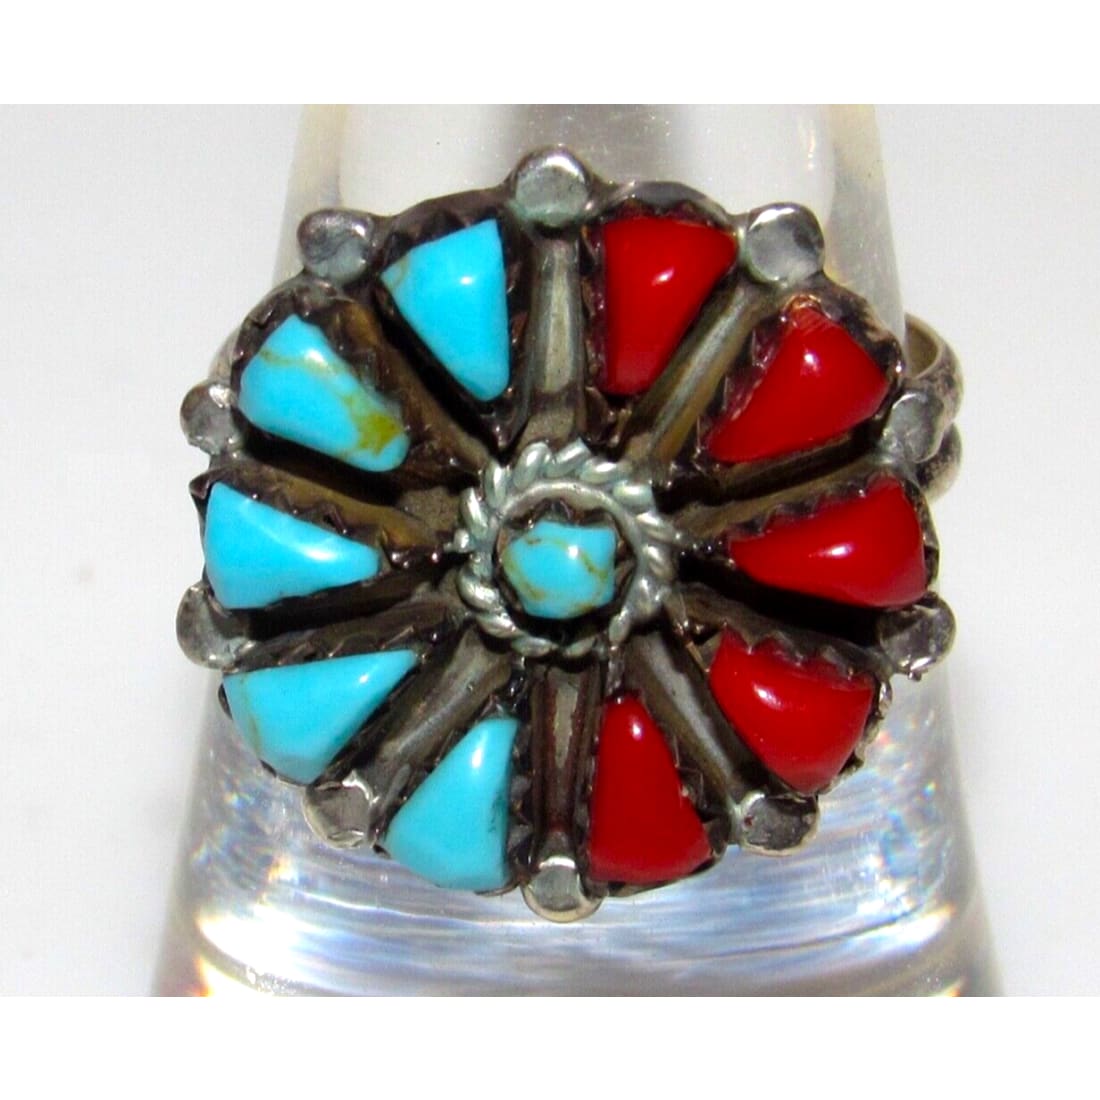 VTG Zuni Turquoise Coral Cluster Ring Size 7 Sterling Silver